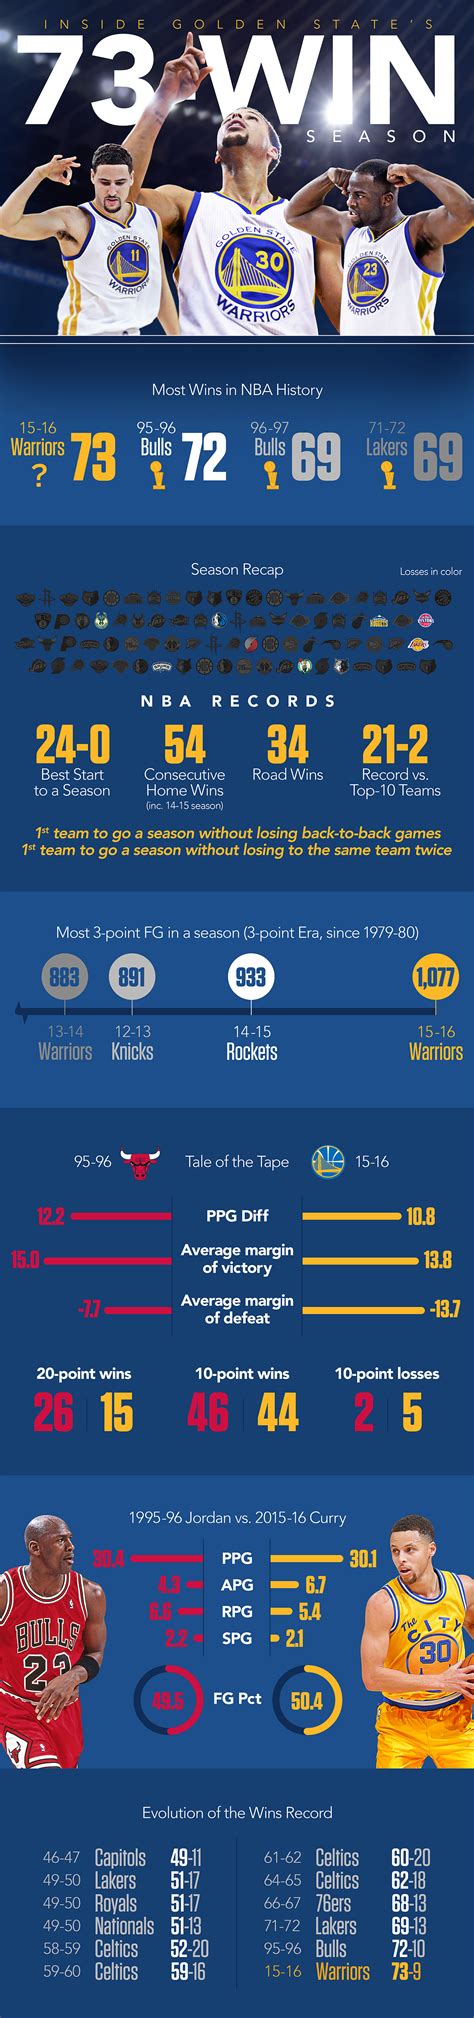 golden state warriors playoff record